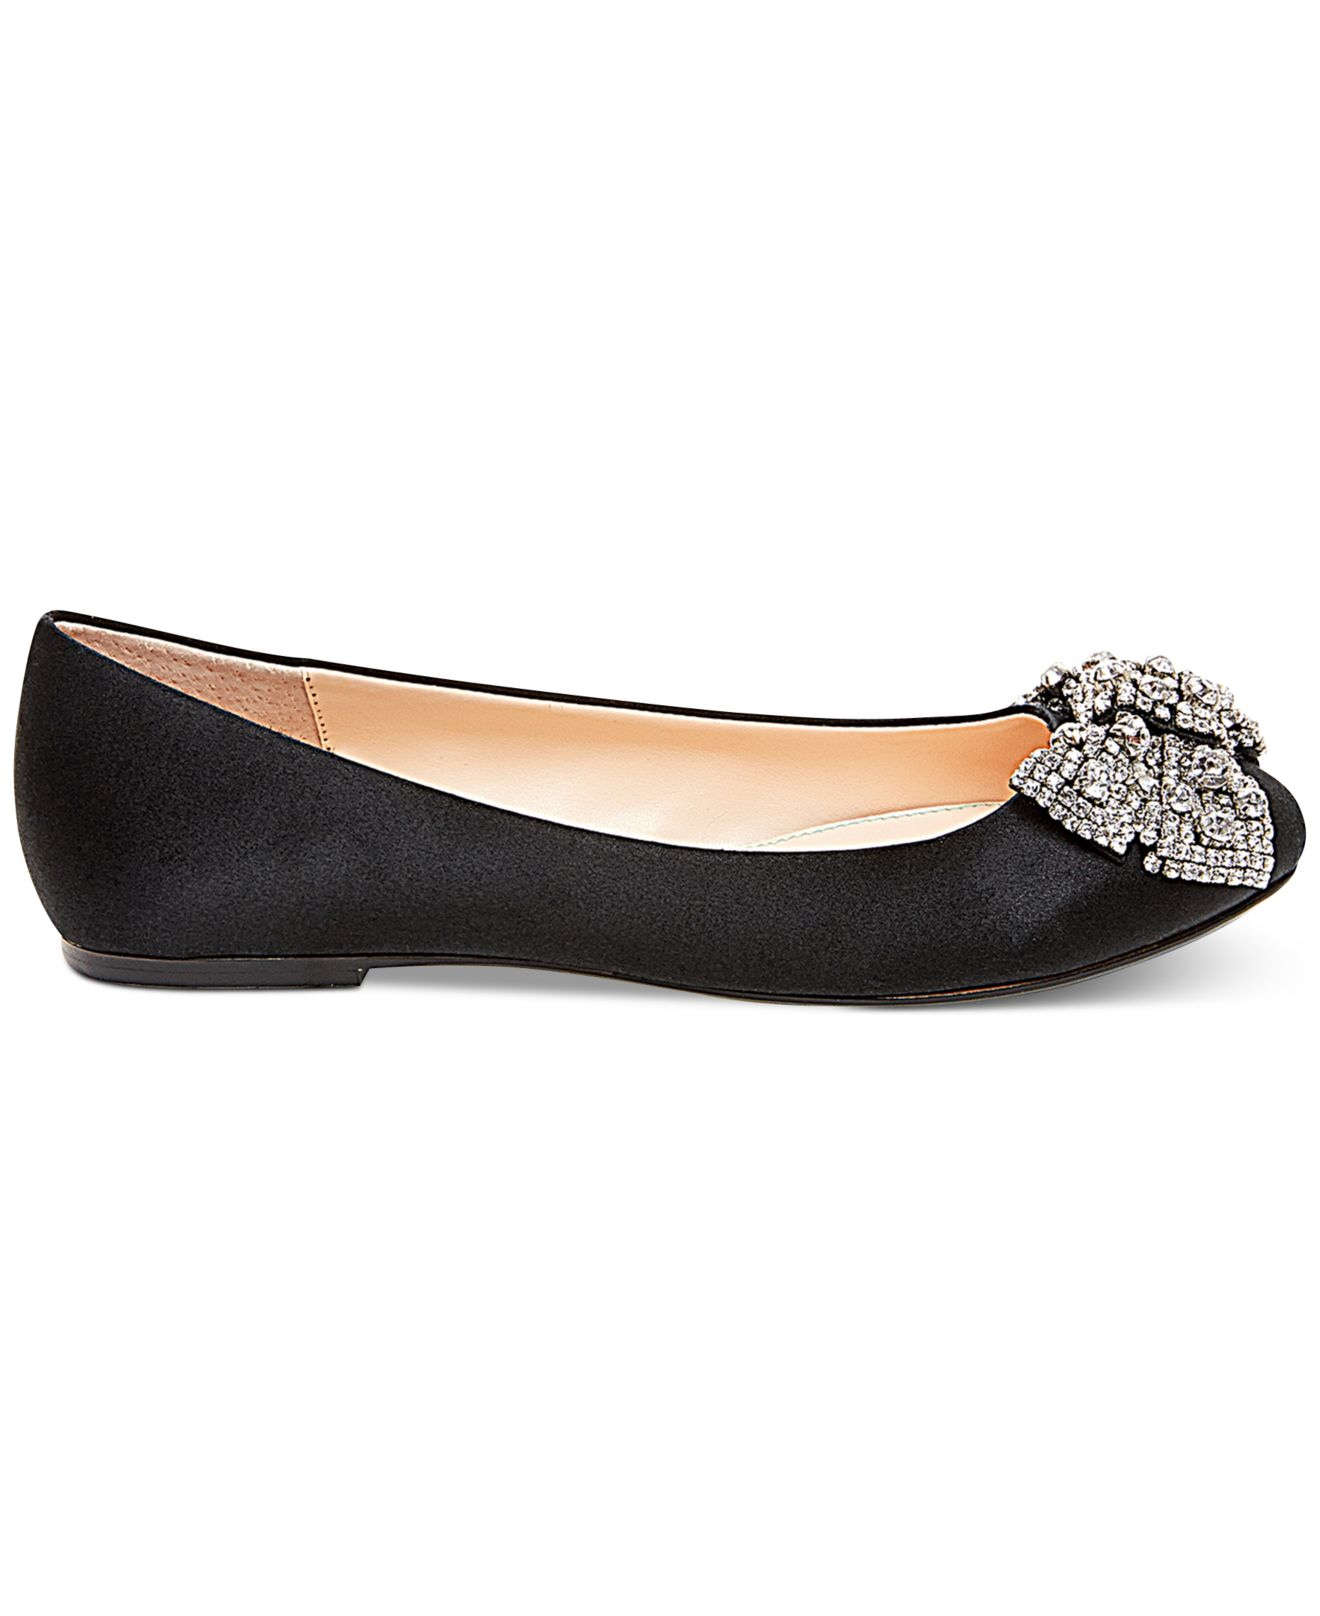 Lyst - Betsey Johnson Ever Bow Ballet Flats in Black